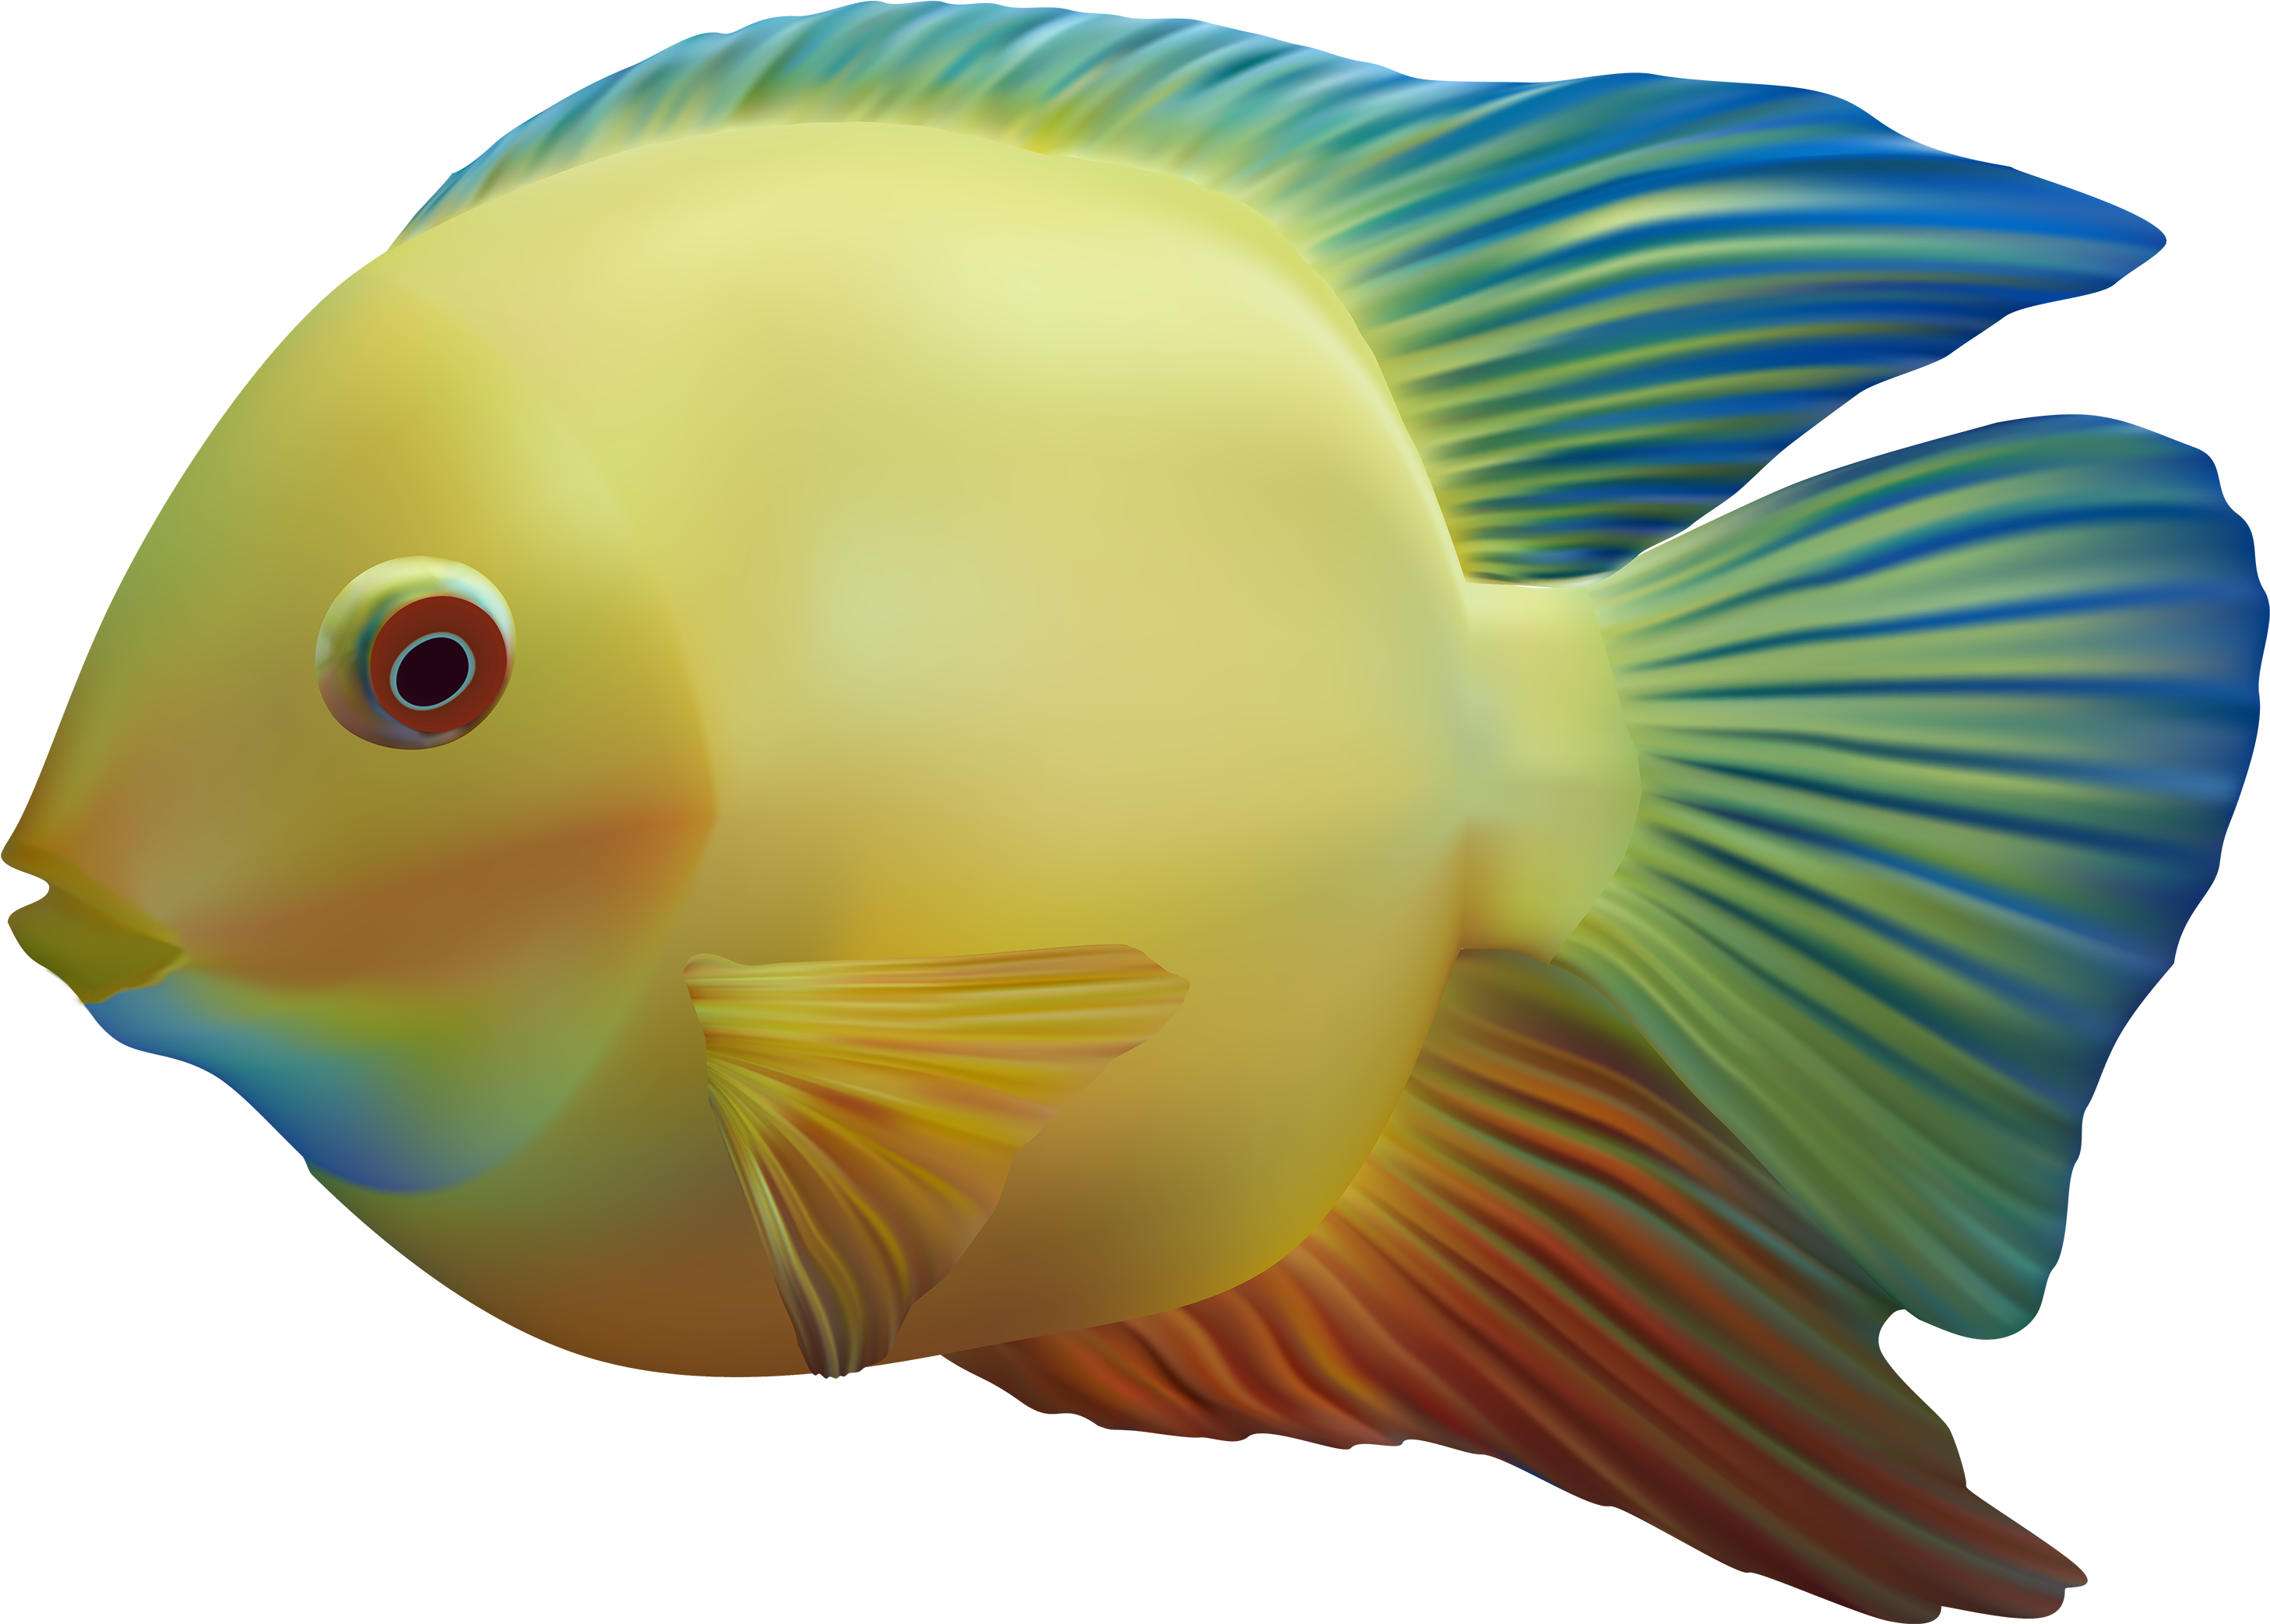 A Yellow Fish With Blue Fins